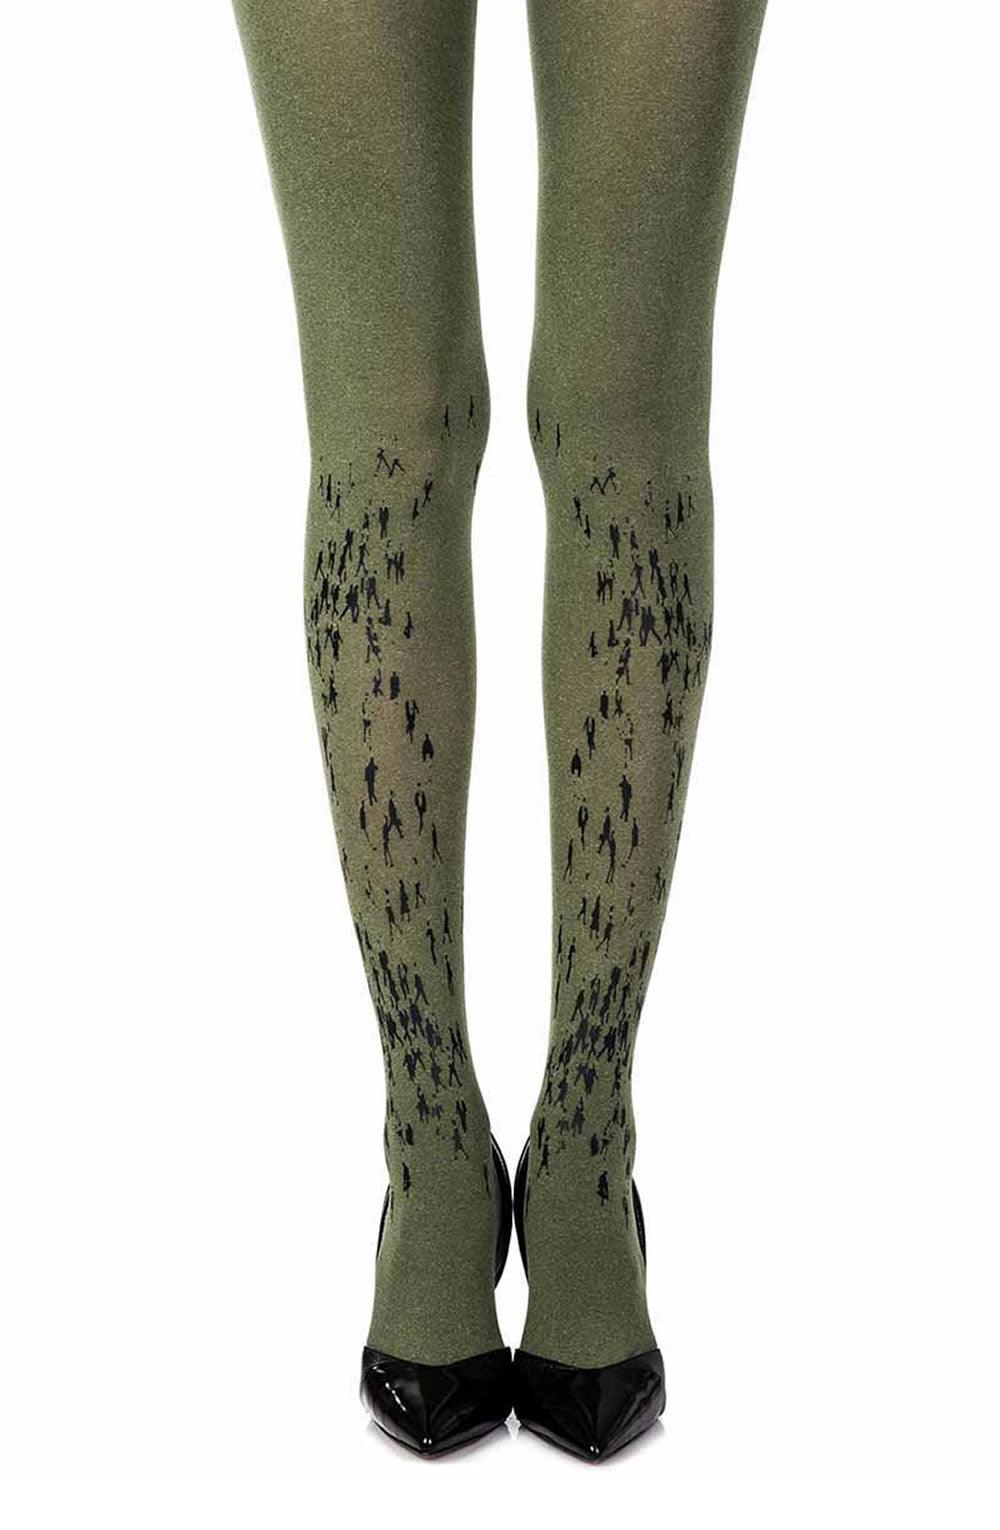 Zohara "Walking By" Green Print Tights - Sydney Rose Lingerie 